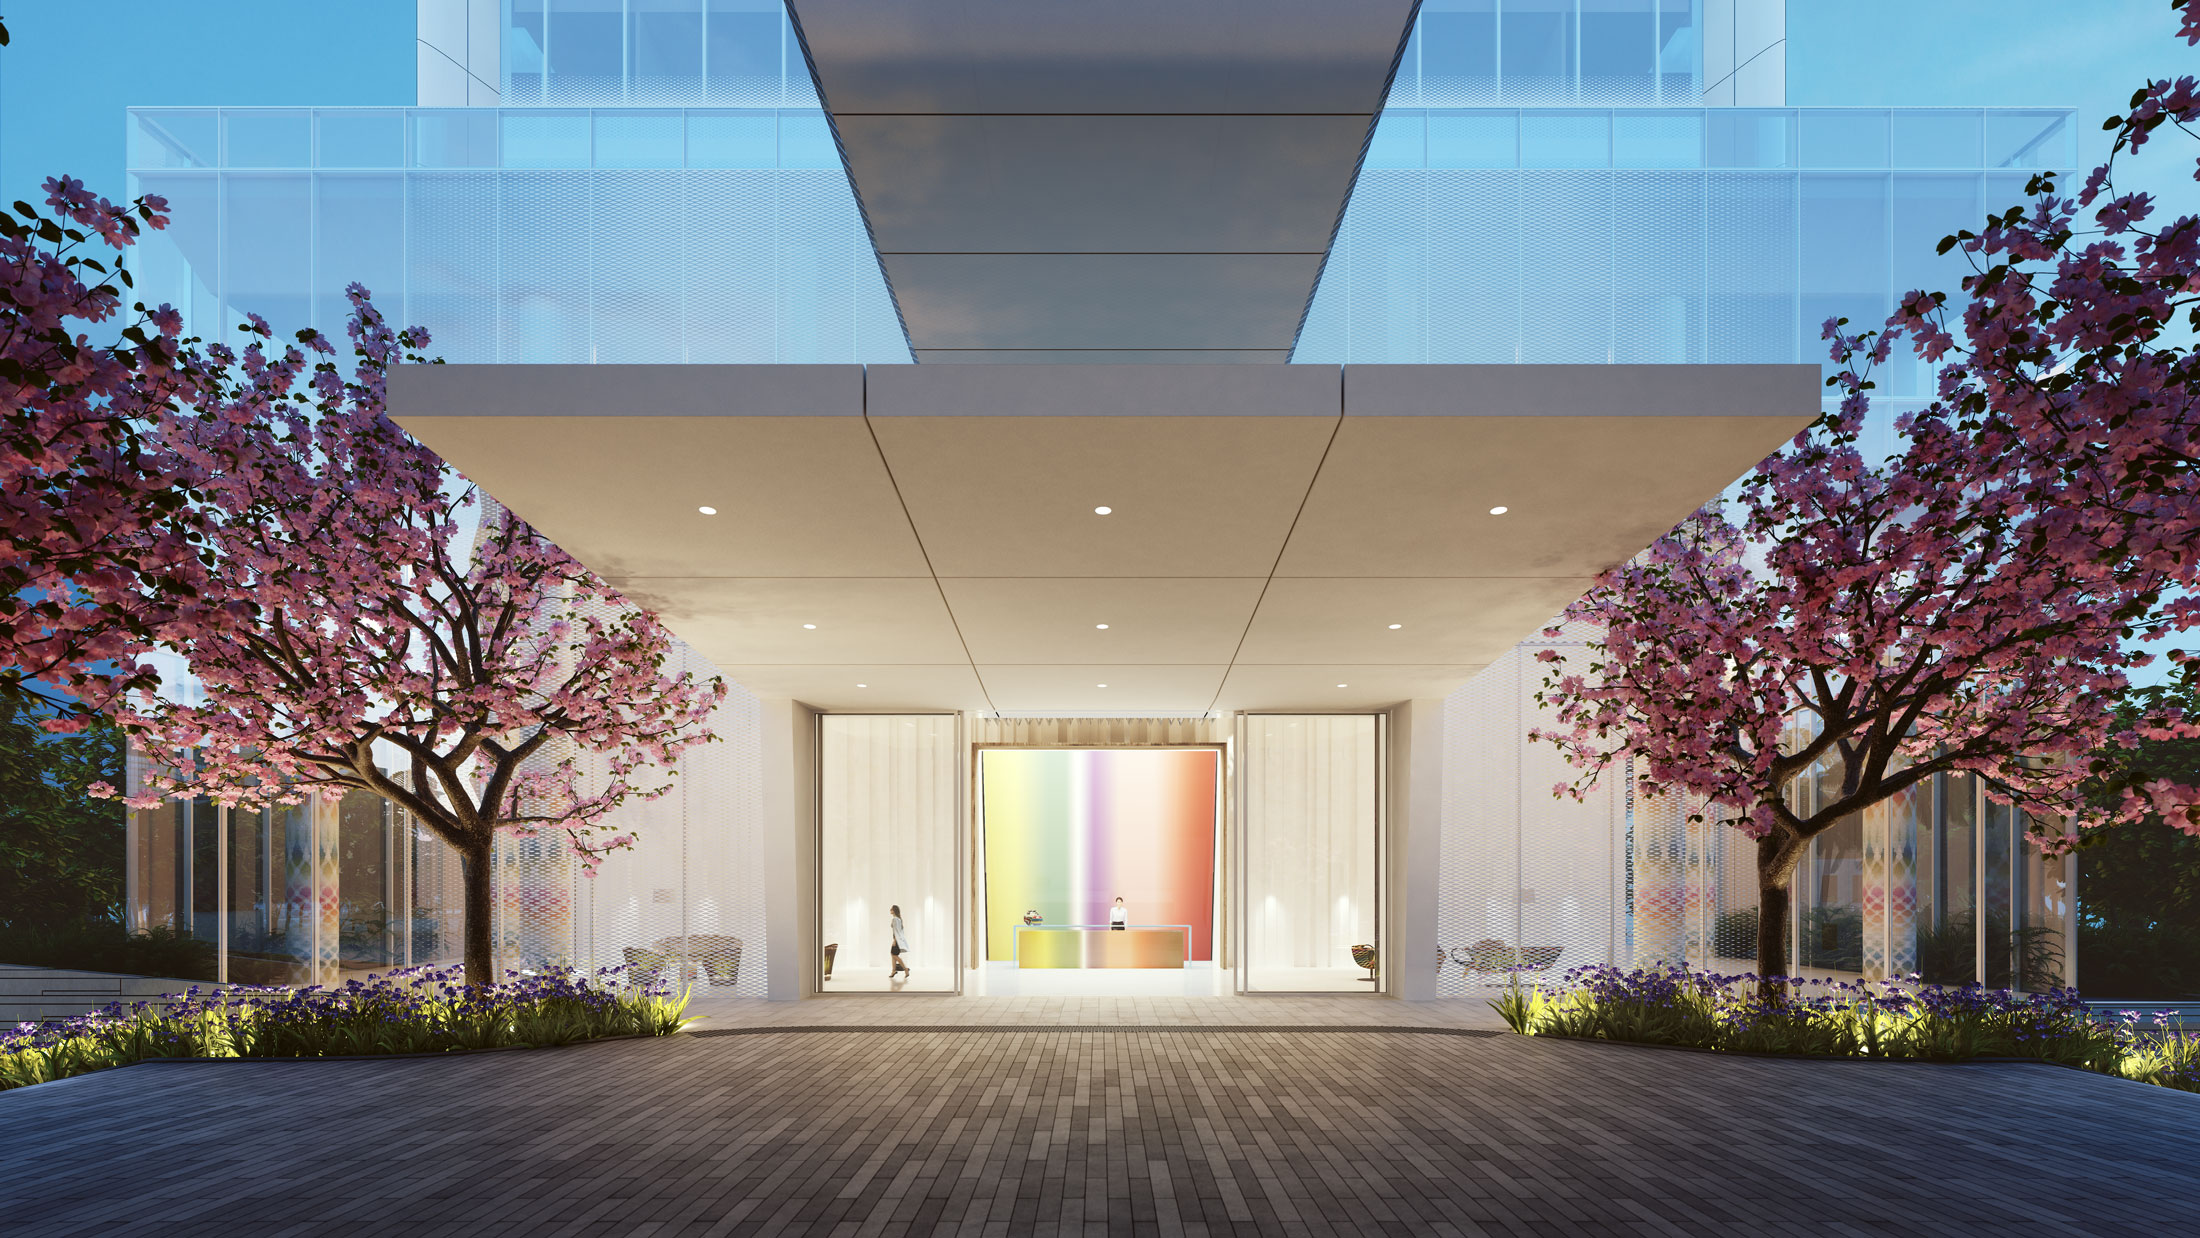 Architectural Rendering of the entrance of the Missoni Baia project located in Miami, Florida